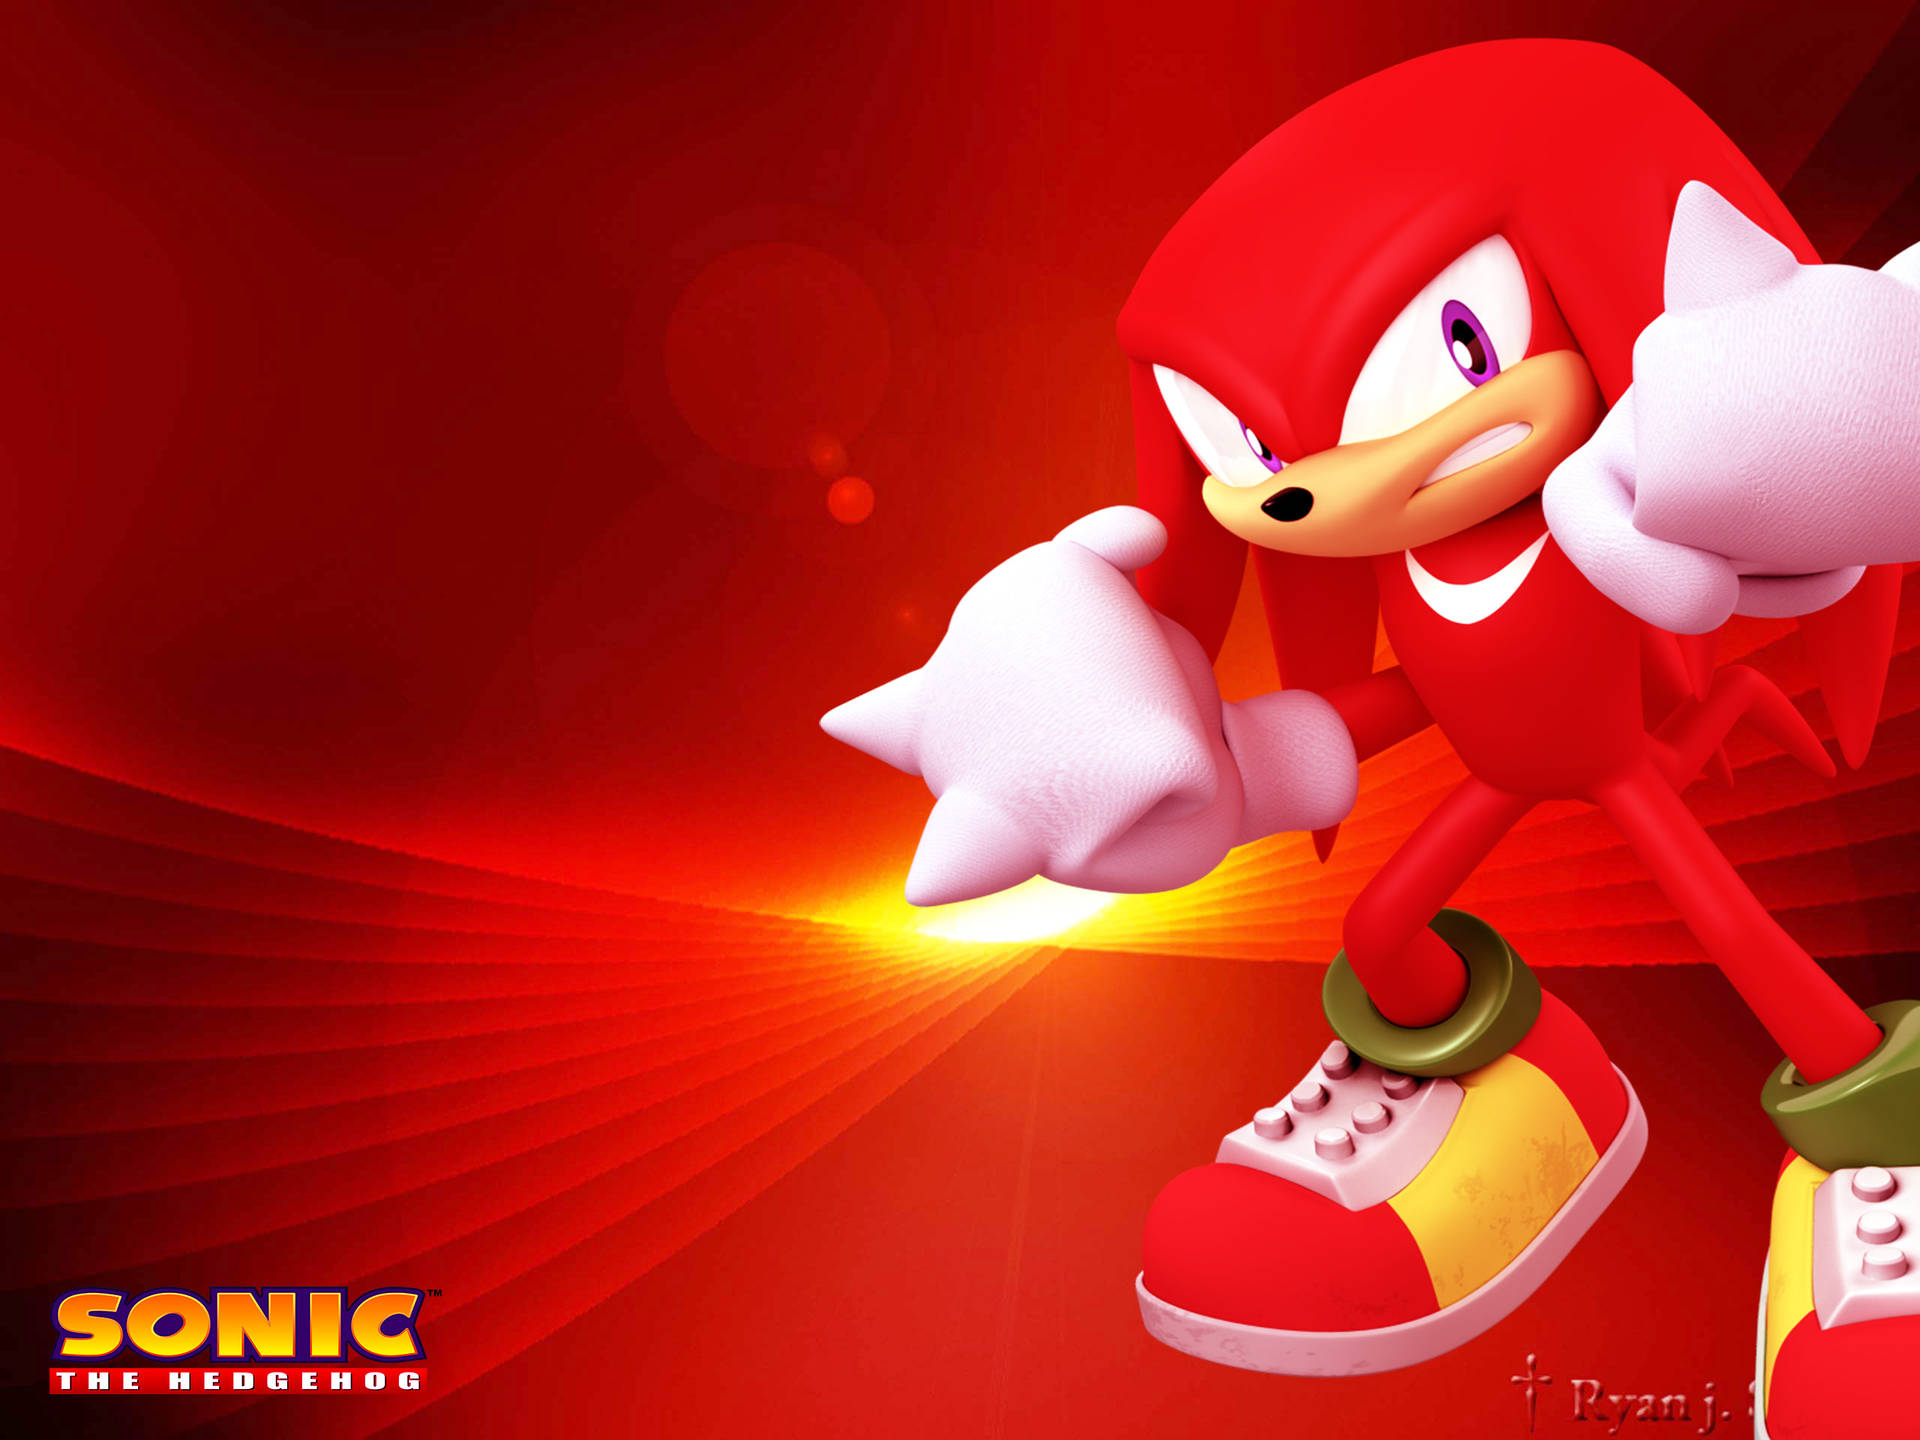 Angry Knuckles The Echidna in Intense Action Wallpaper